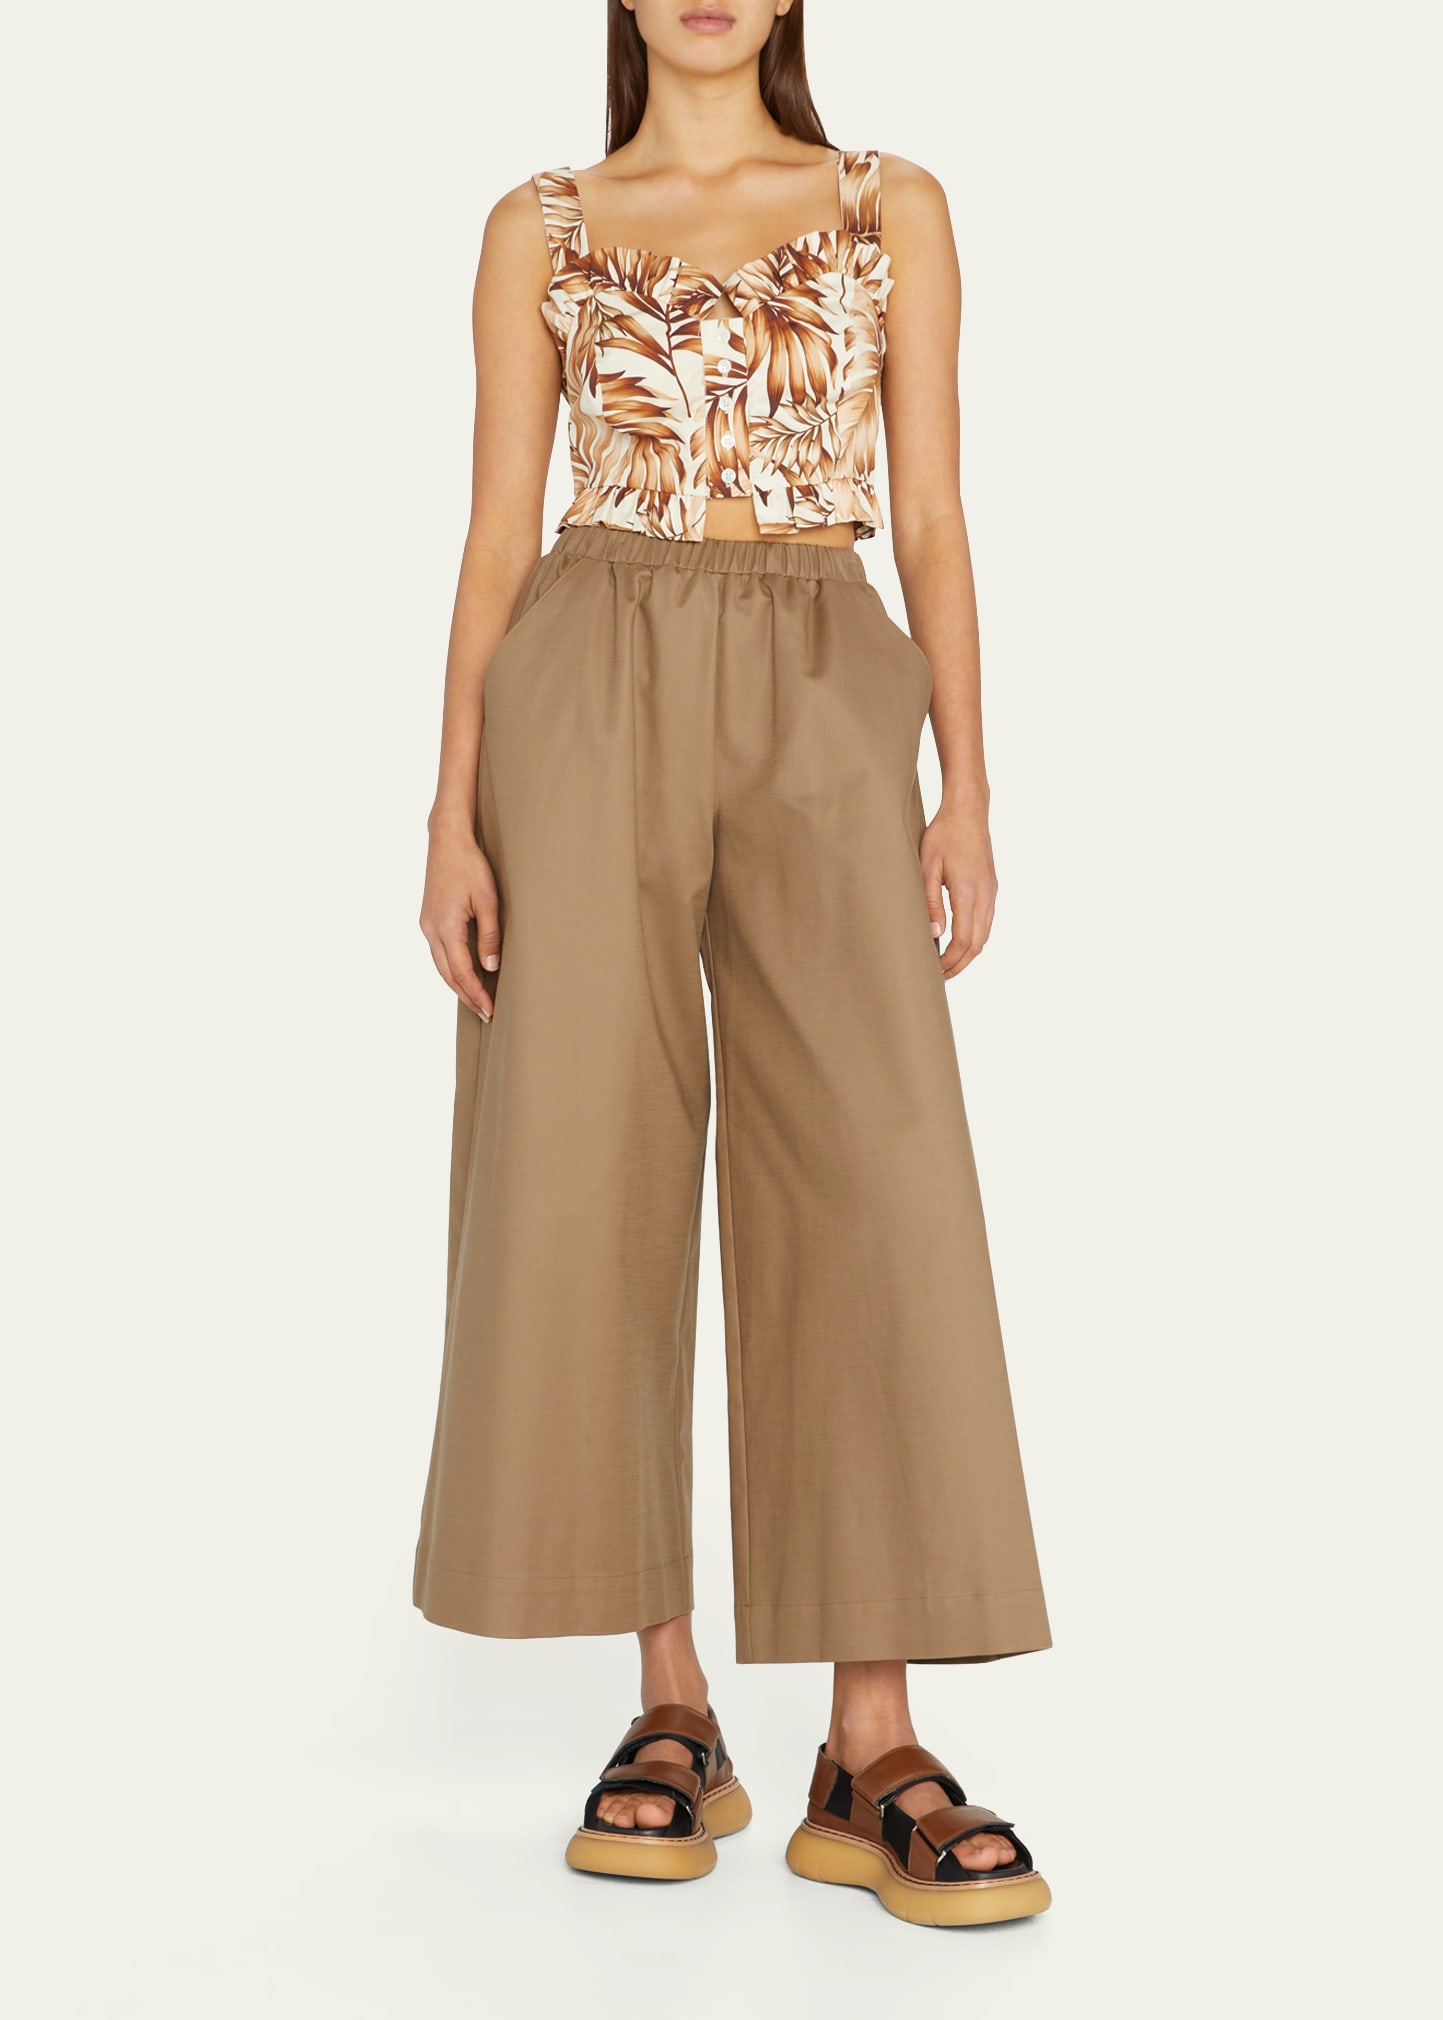 Autumn Adeigbo Aiday Leaf Printed Button-front Ruffled Crop Top In Tan Palm Print